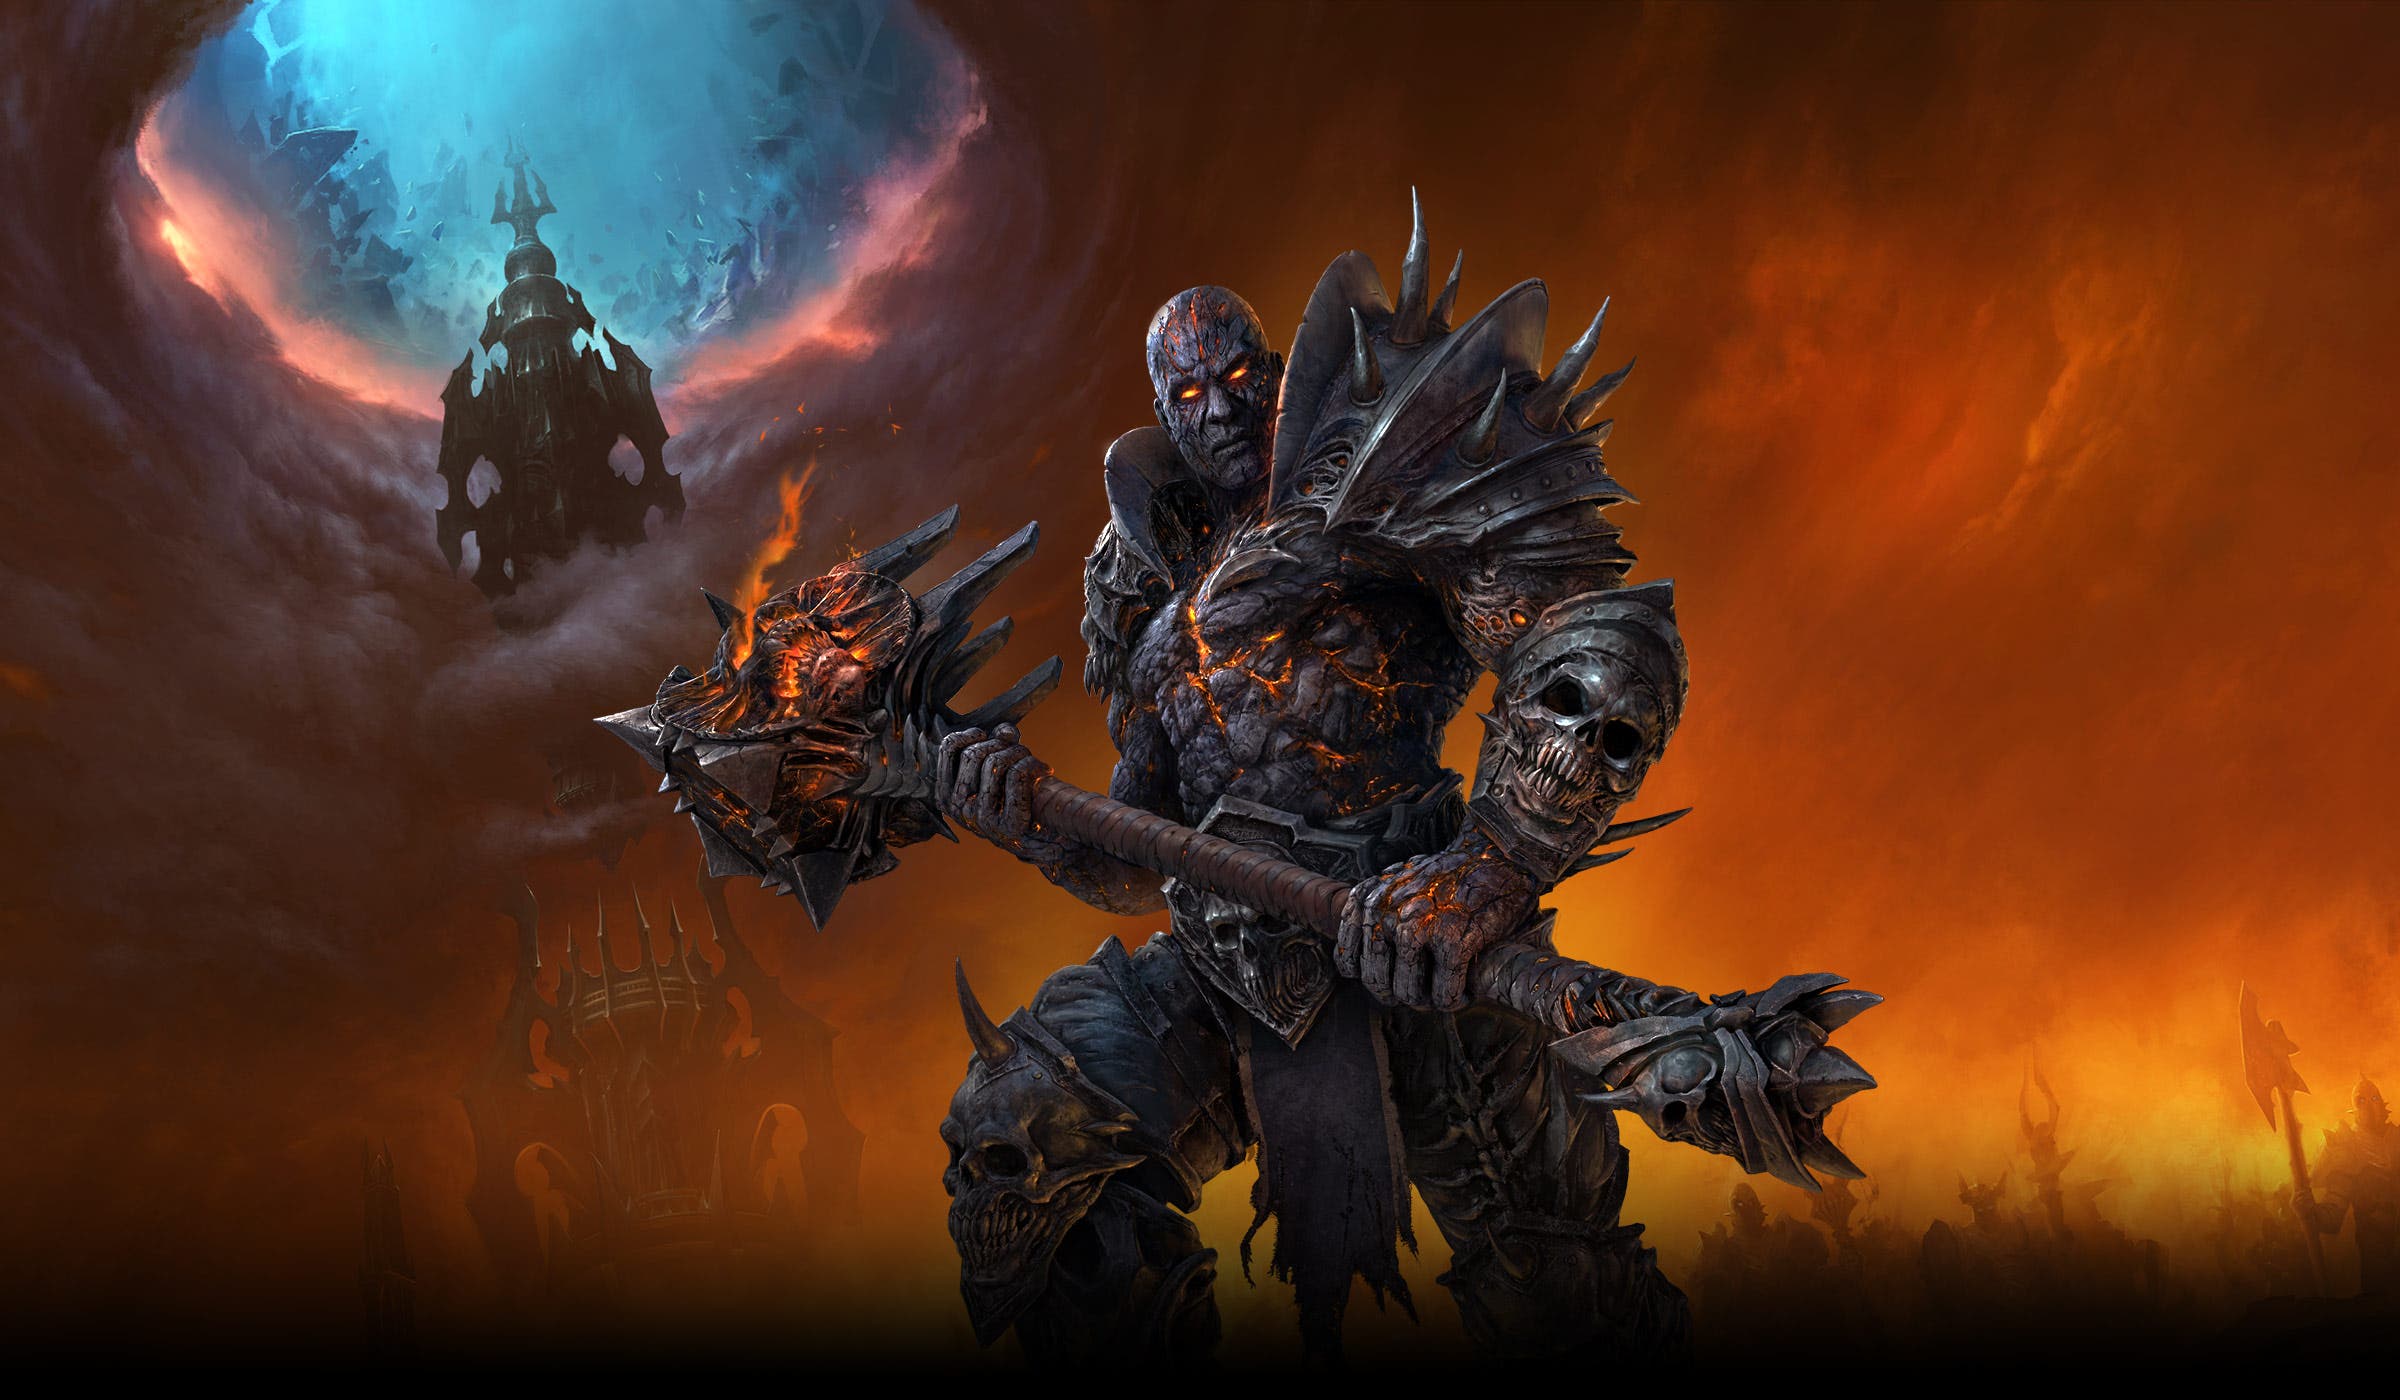 World of Warcraft: Shadowlands - Sylvanas Easily Defeats The Lich King